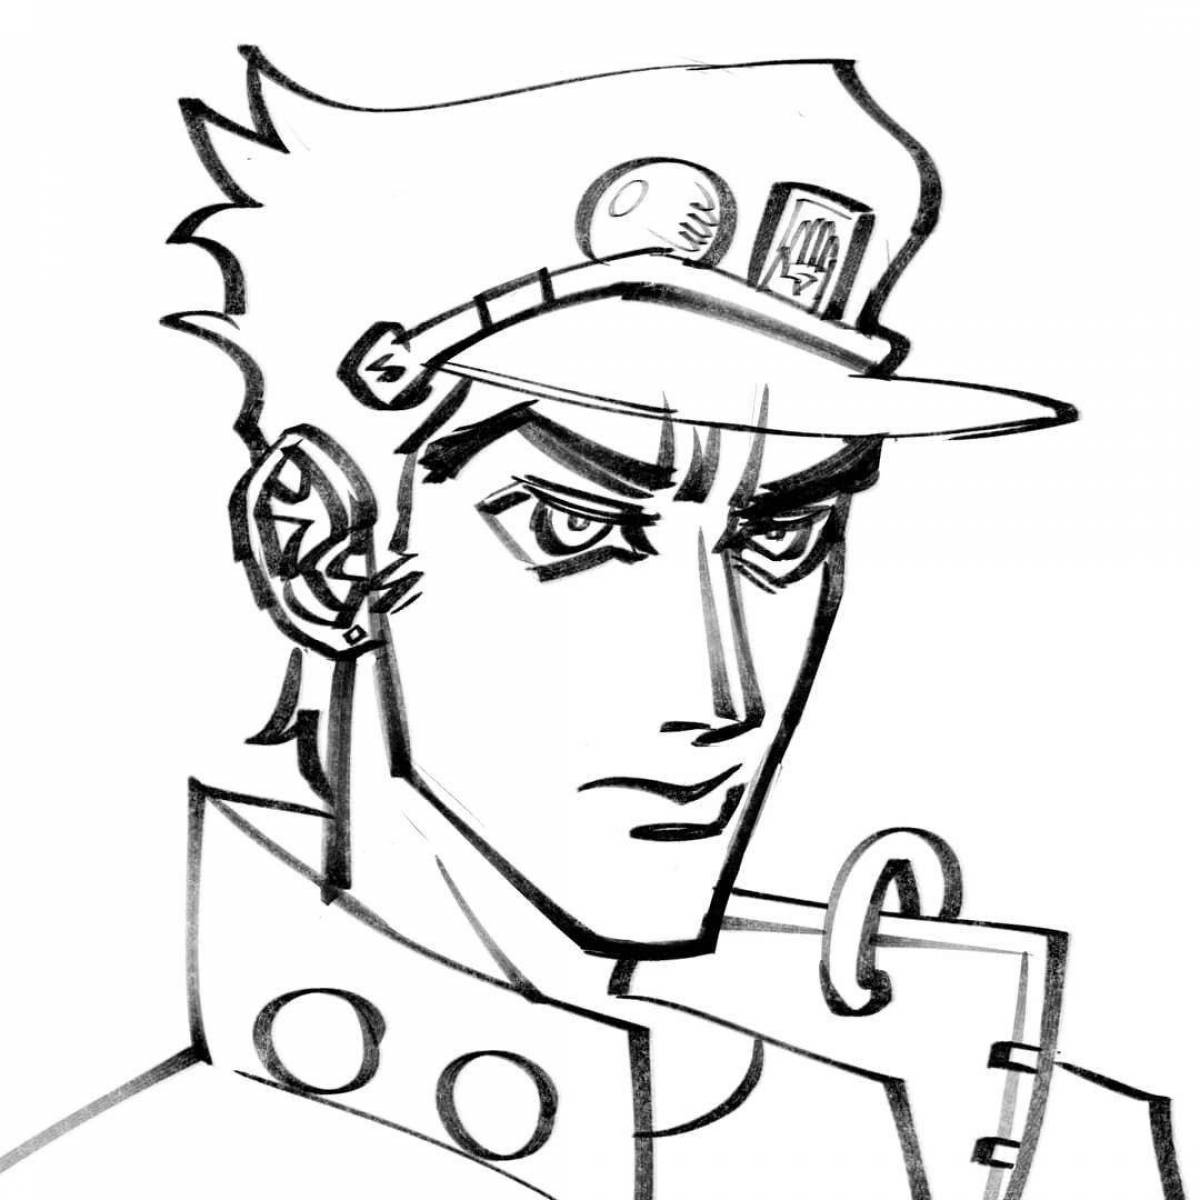 Jotaro kujo's awesome coloring book